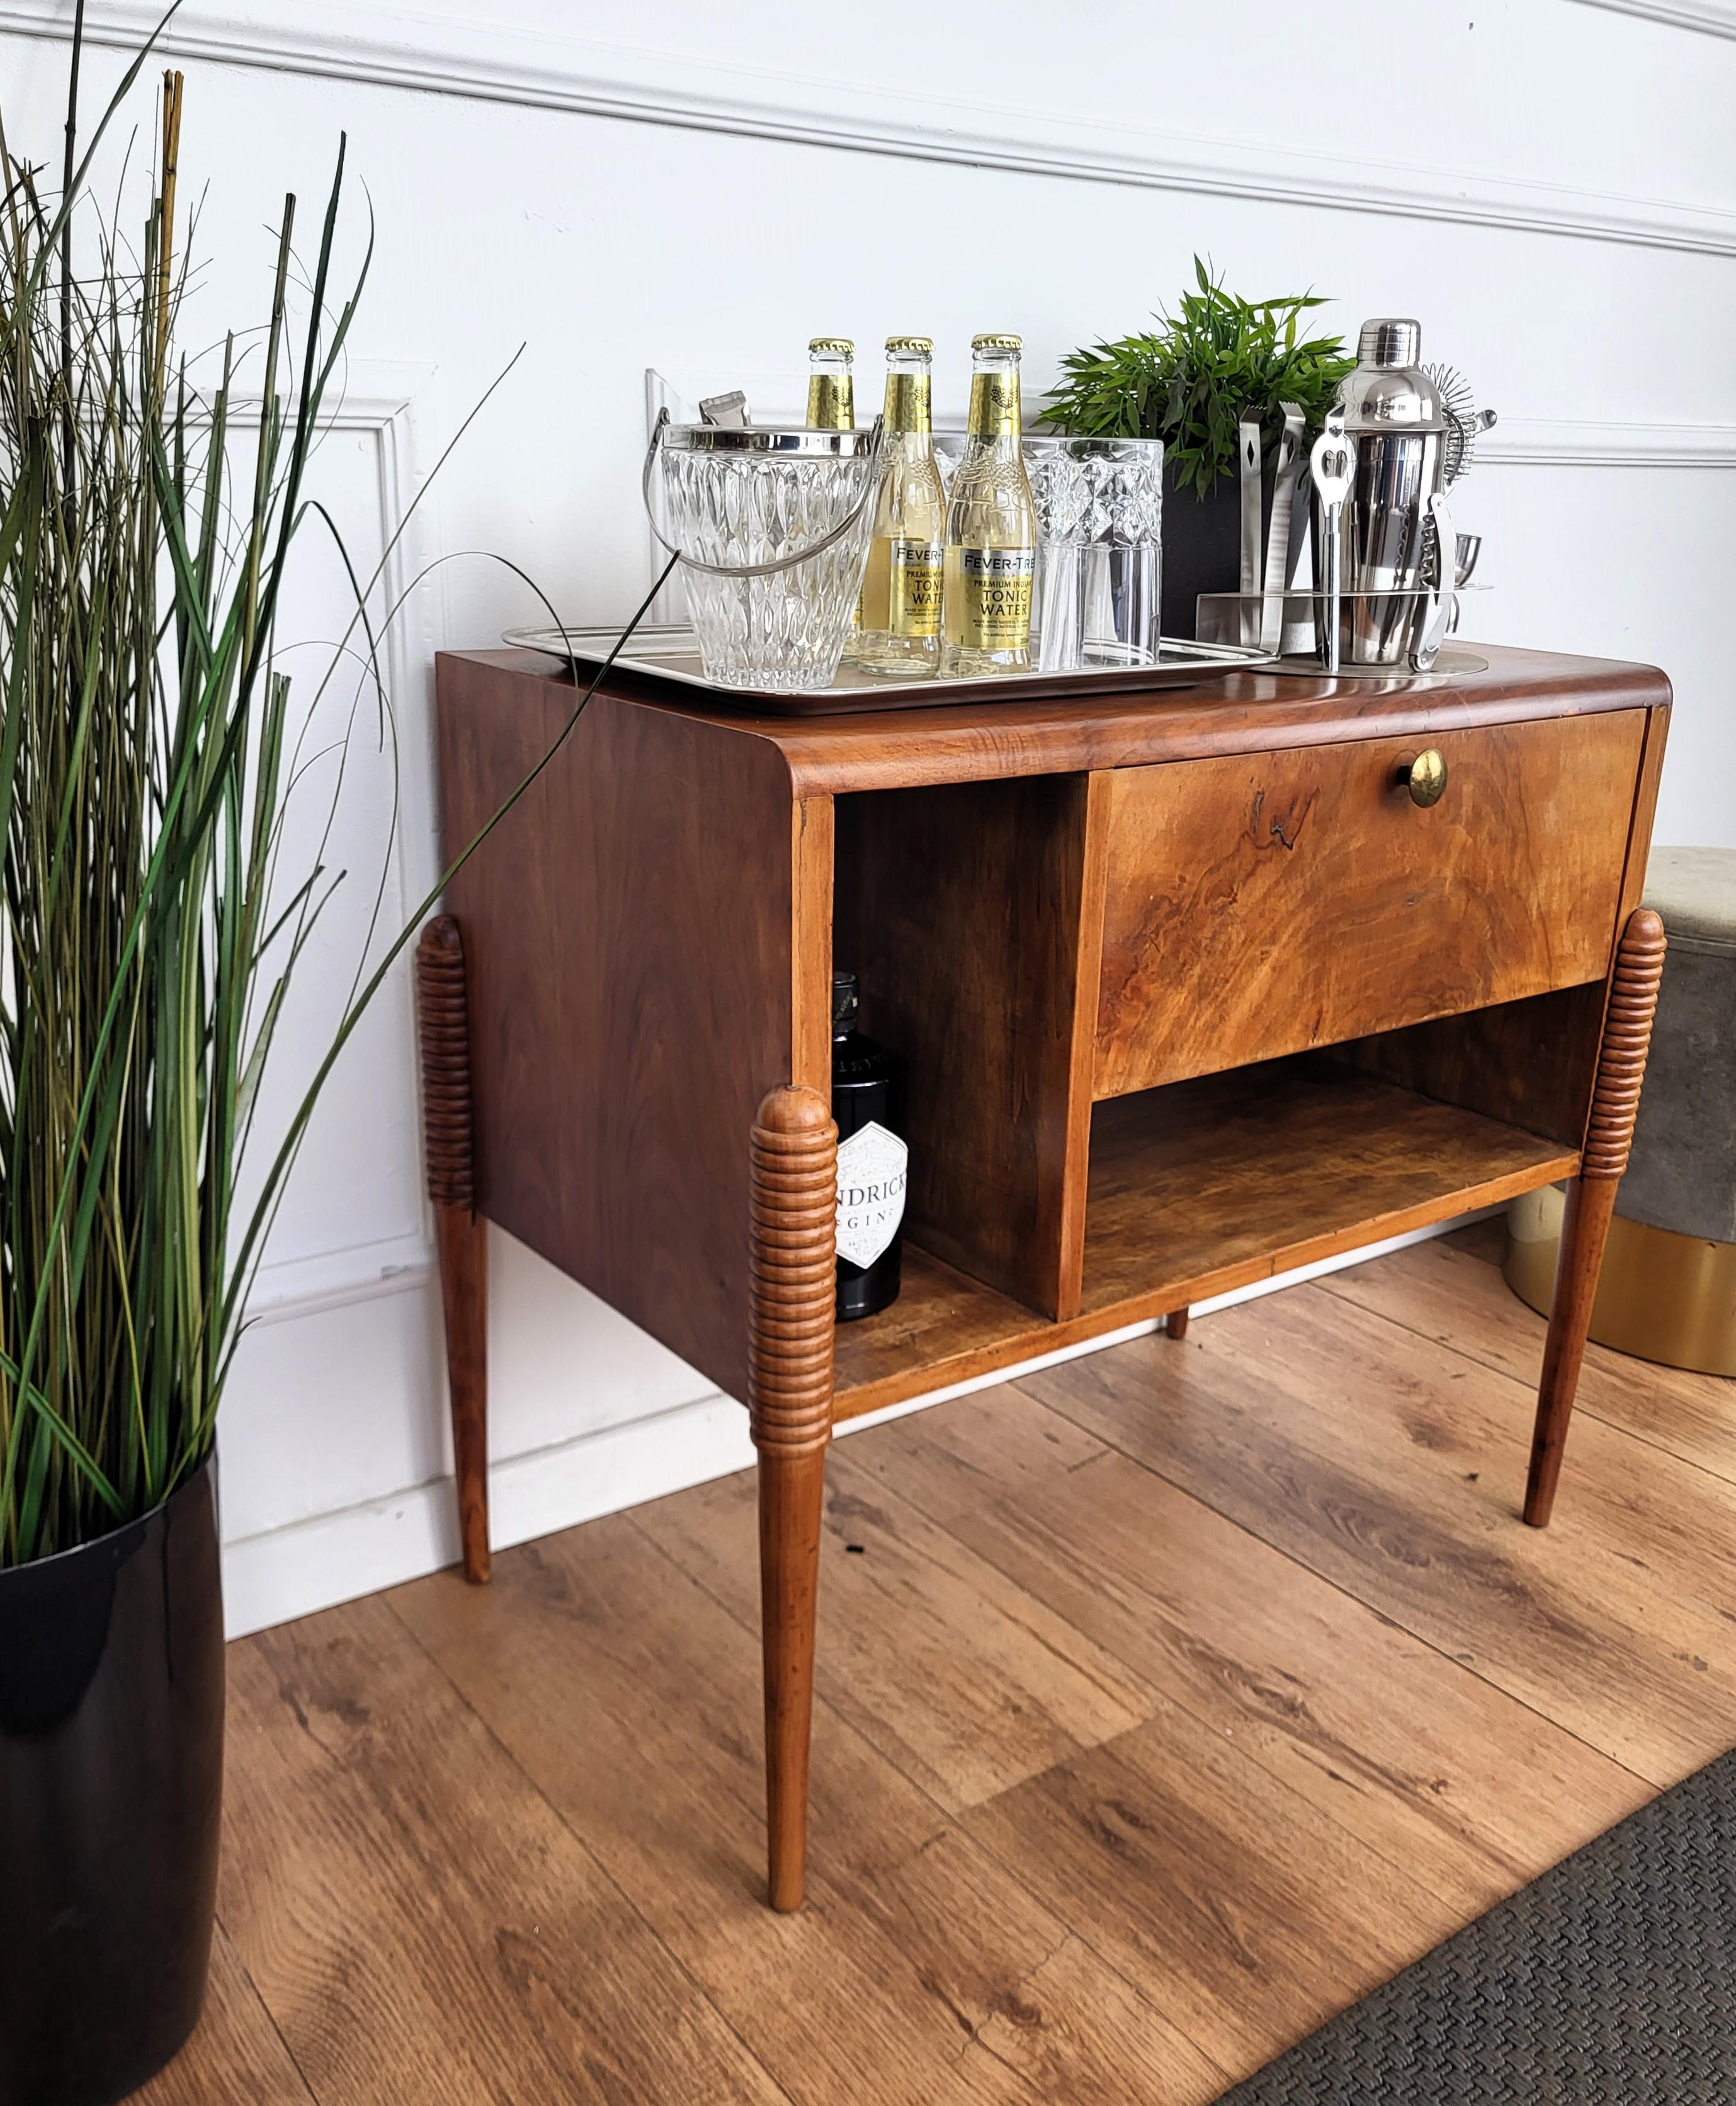 1960s Italian Mid-Century Modern Wood and Brass Dry Bar Drinks Cabinet For Sale 1